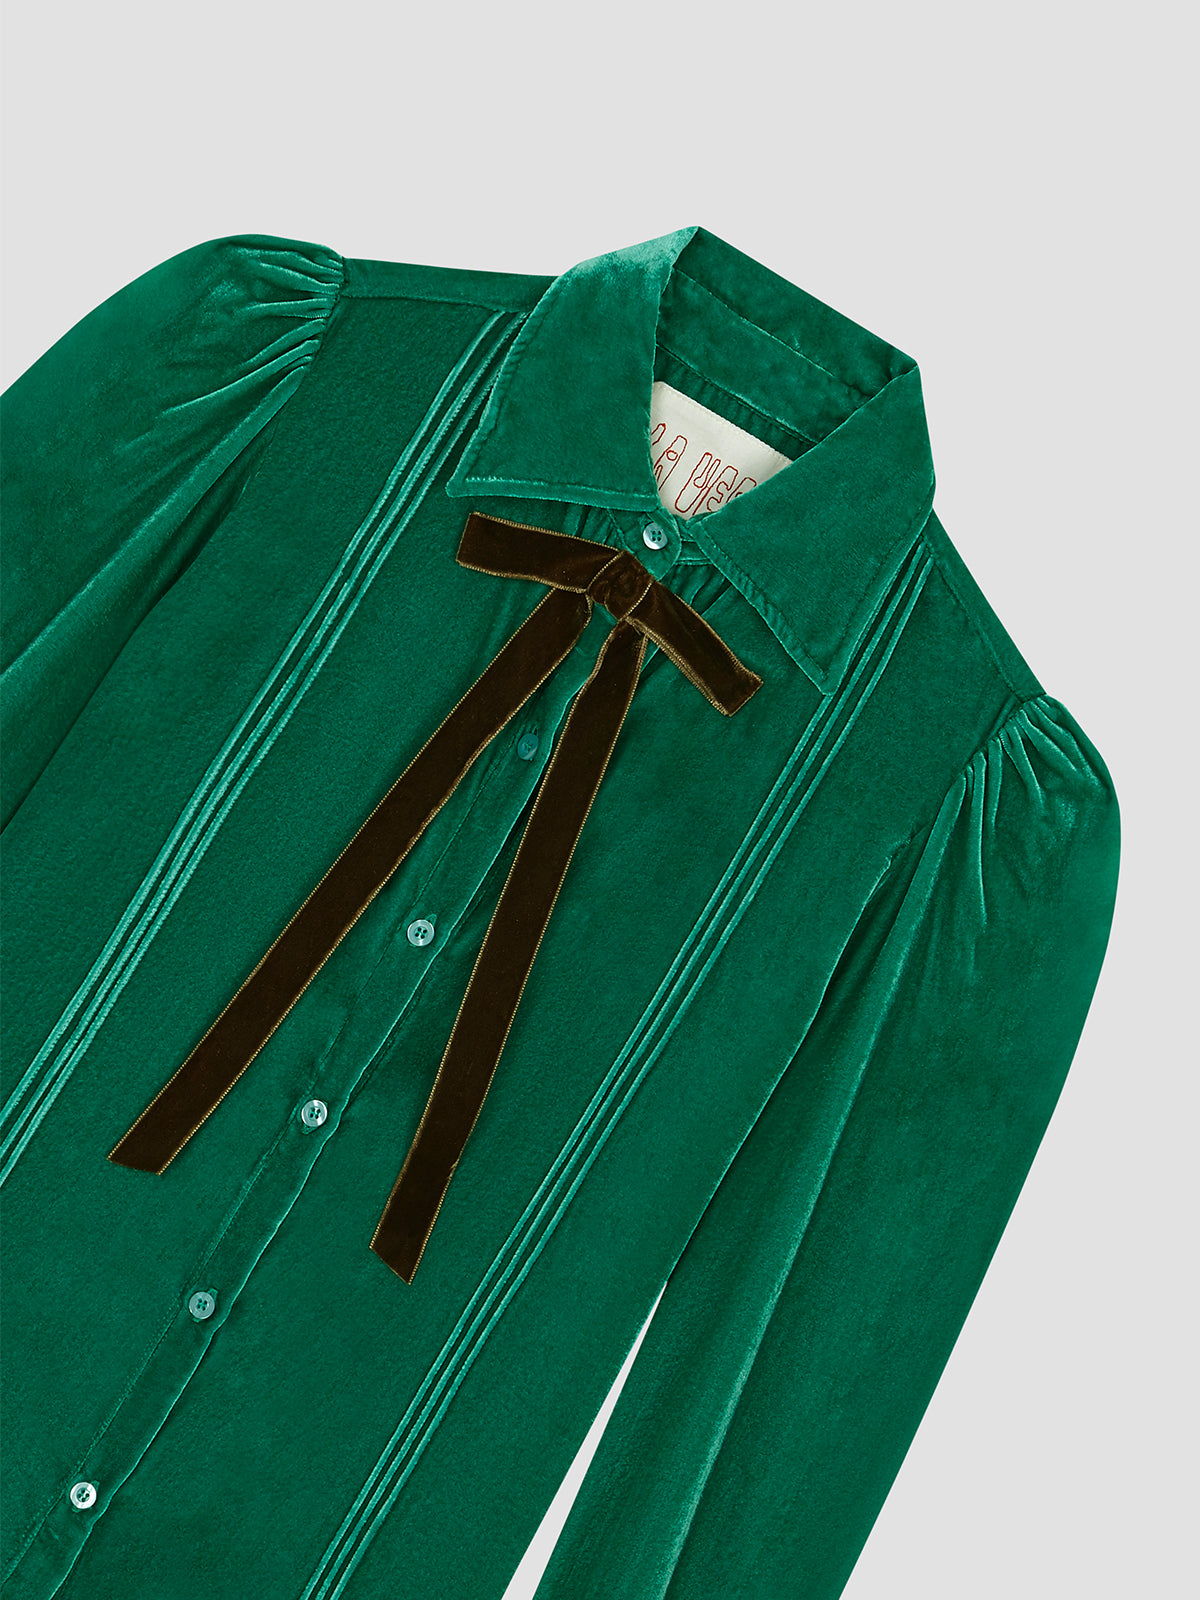 Green velvet shirt with brown bow on the collar